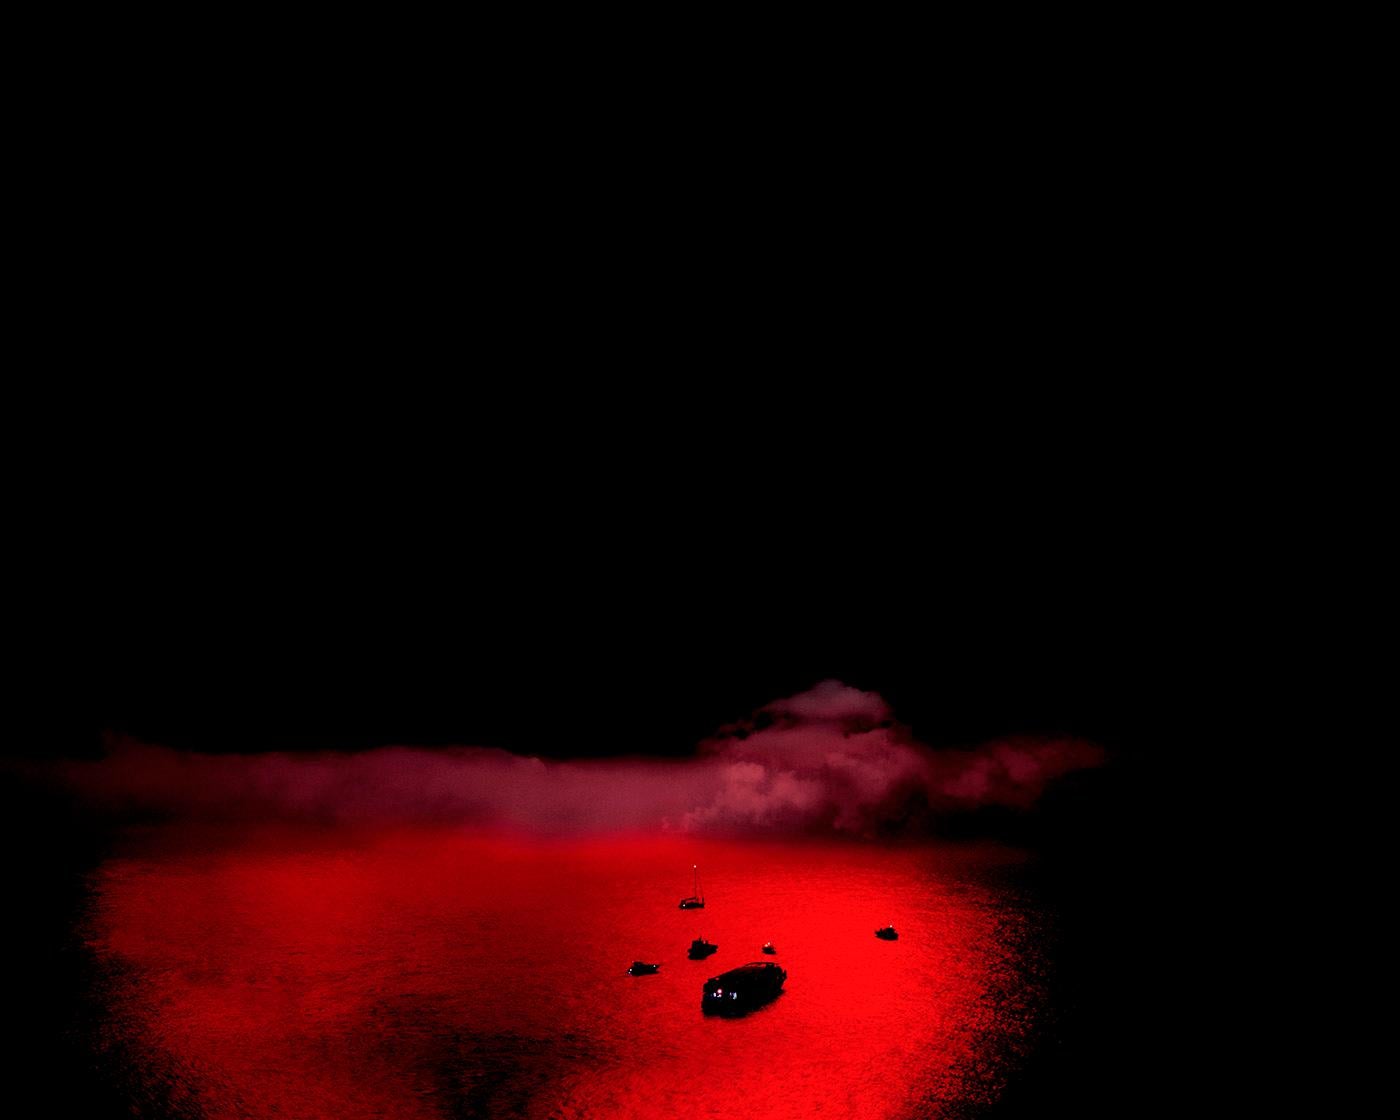 Arslan Sükan Abstract Photograph - Out of the Red, 2009, From The Series Of While You Are Sleeping